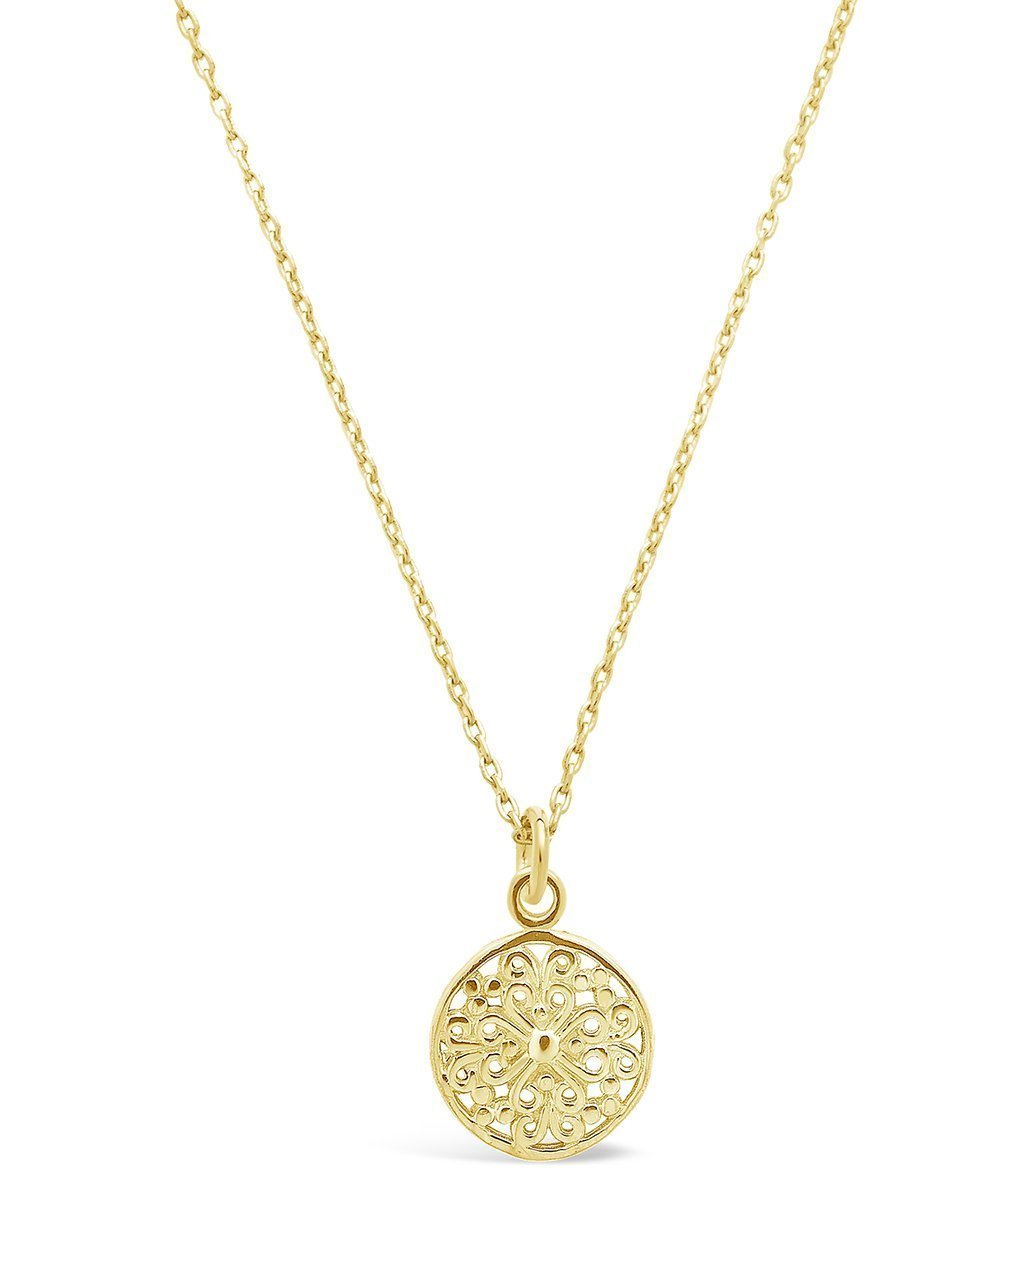 SHINE by Sterling Forever Sterling Silver Intricate Cutout Disk Pendant Necklace Necklace SHINE by Sterling Forever Gold 